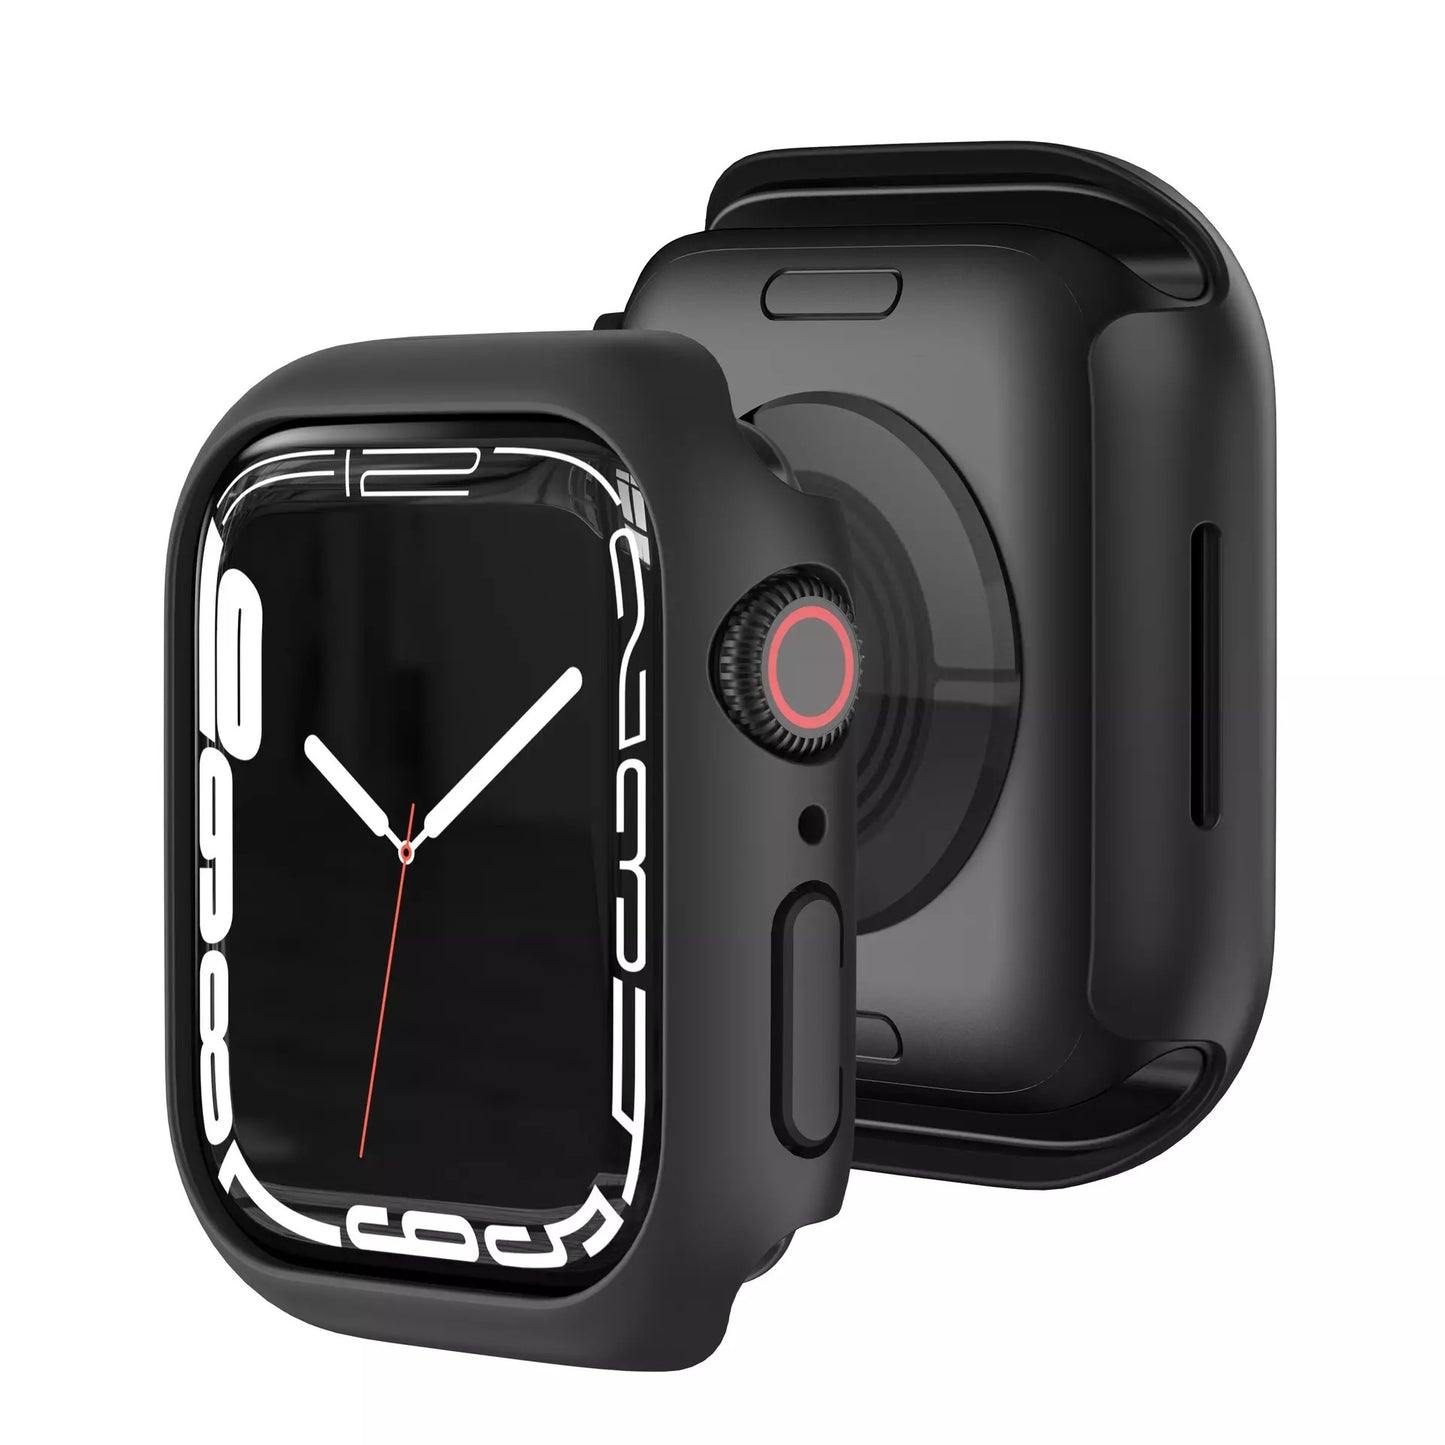 Premium Hard PC Frame Case By iSerieshub For Smart Watch